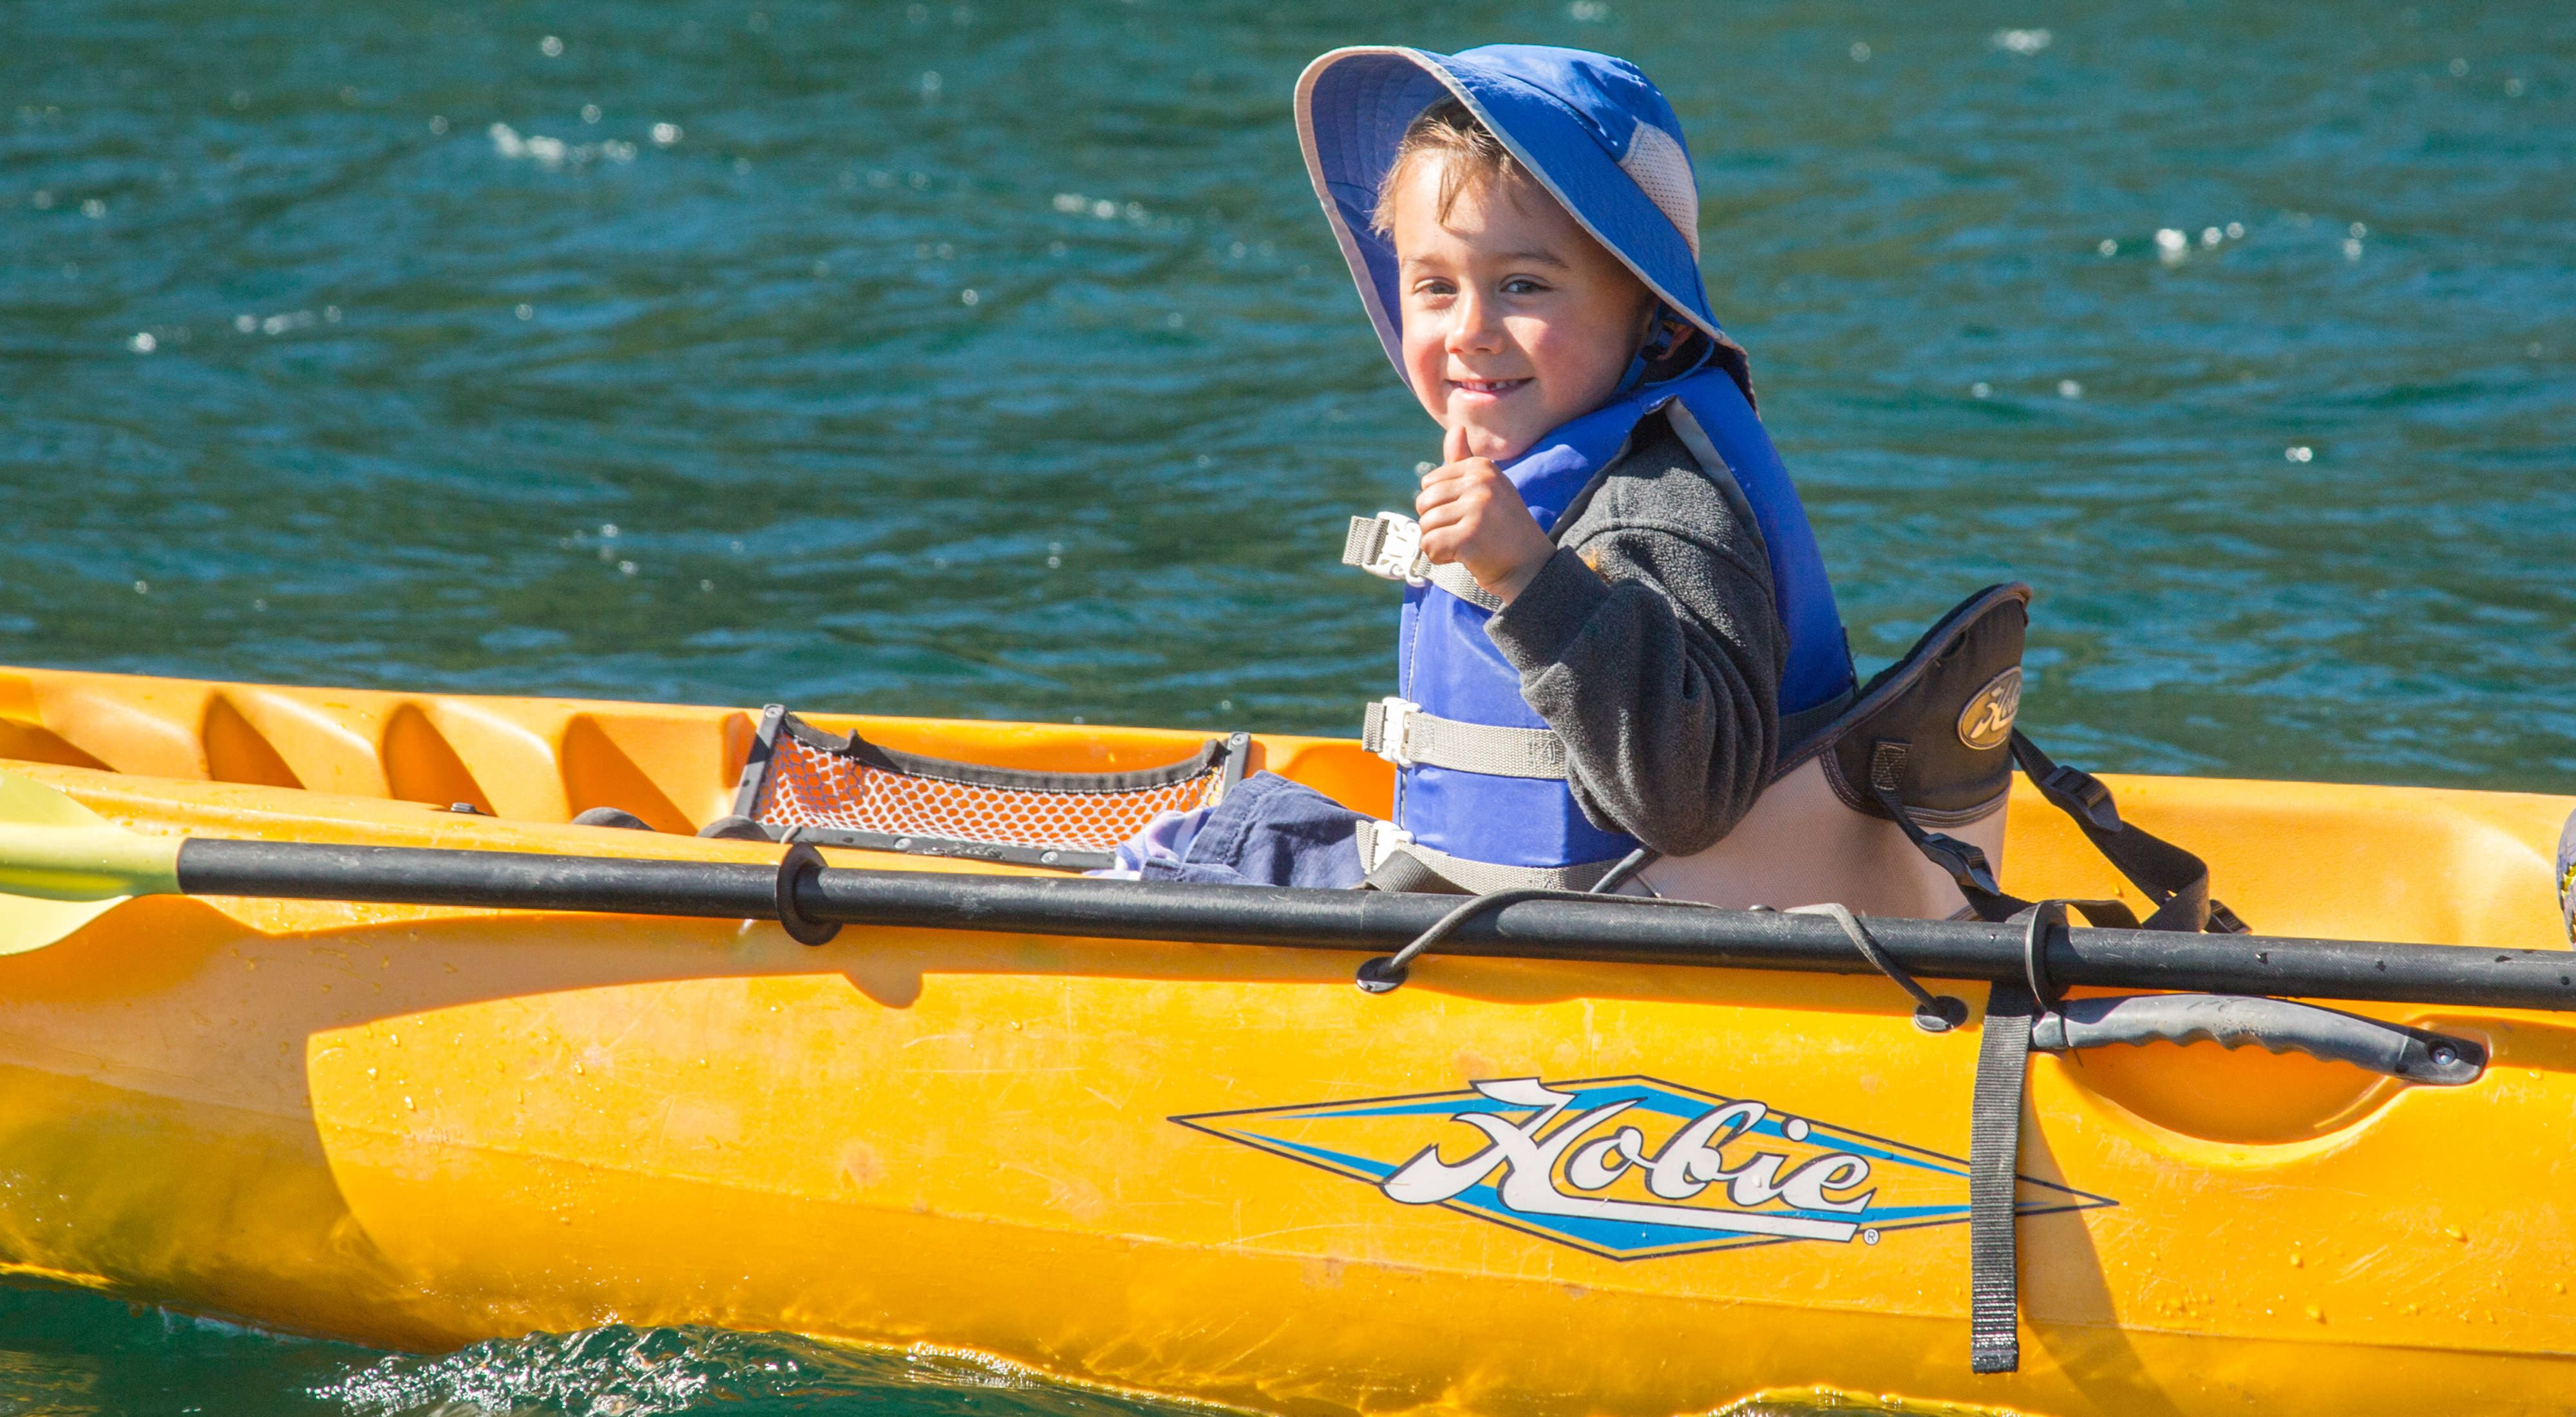 A young child wearing a hat and a life vest sits in a yellow kayak in blue water.